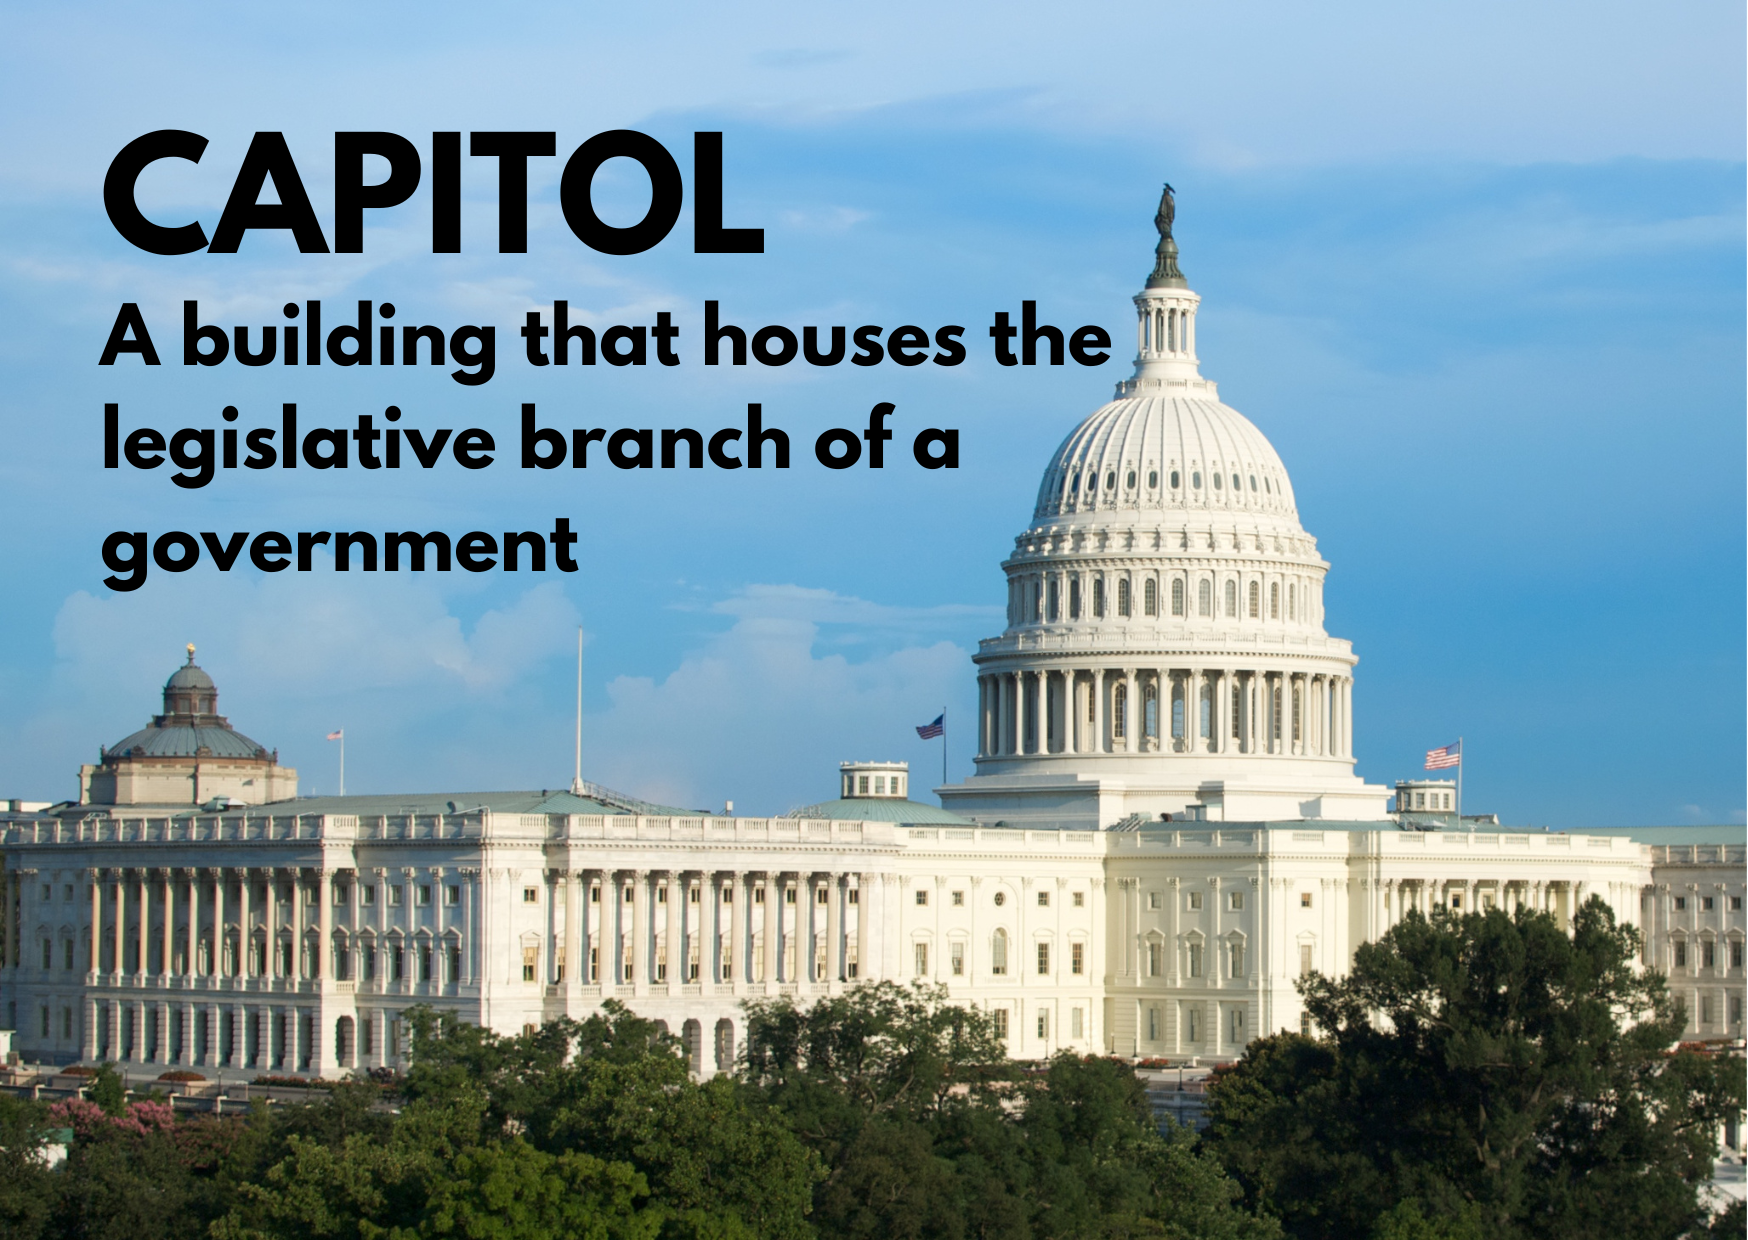 A picture of the capitol building with the explanation: Capitol - A building that houses the legislative branch of government.